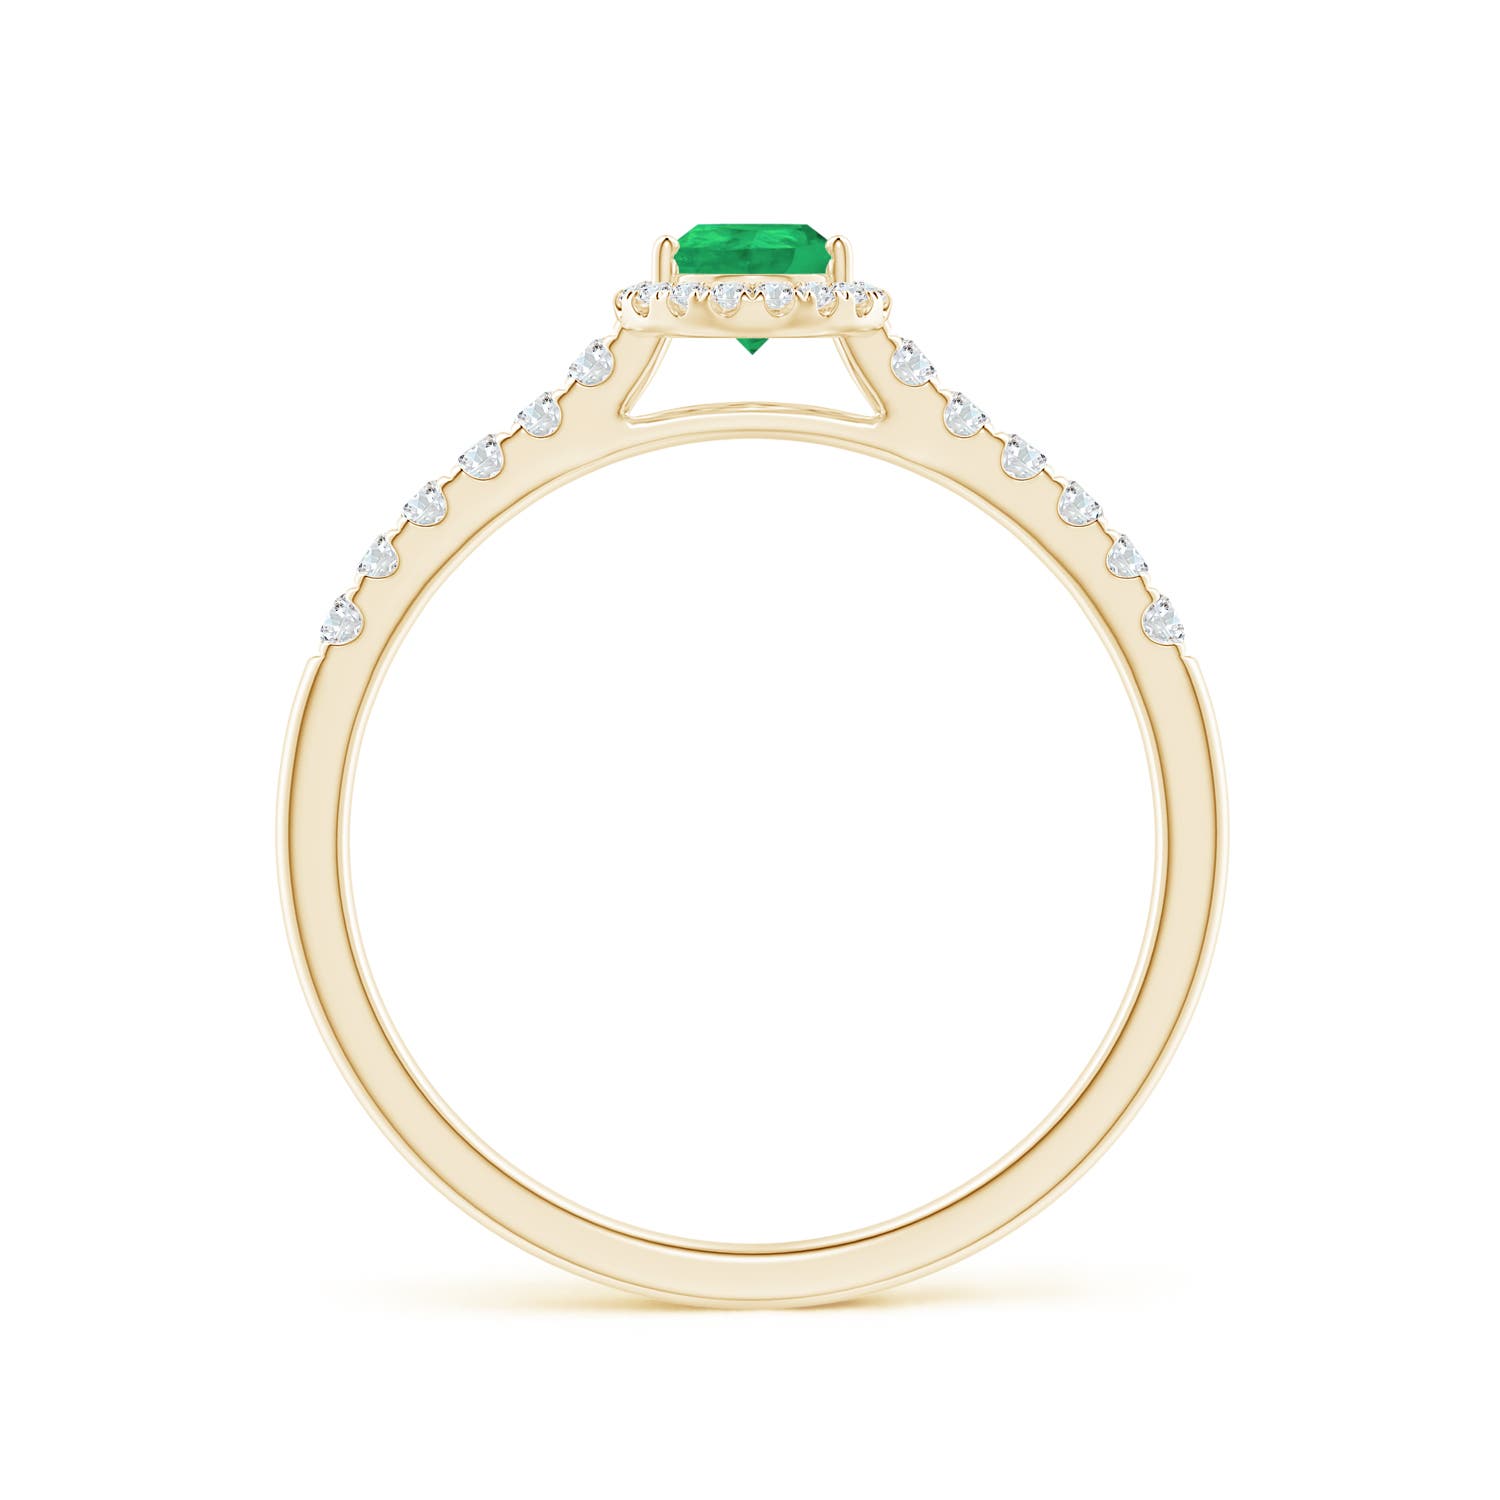 A - Emerald / 0.56 CT / 14 KT Yellow Gold